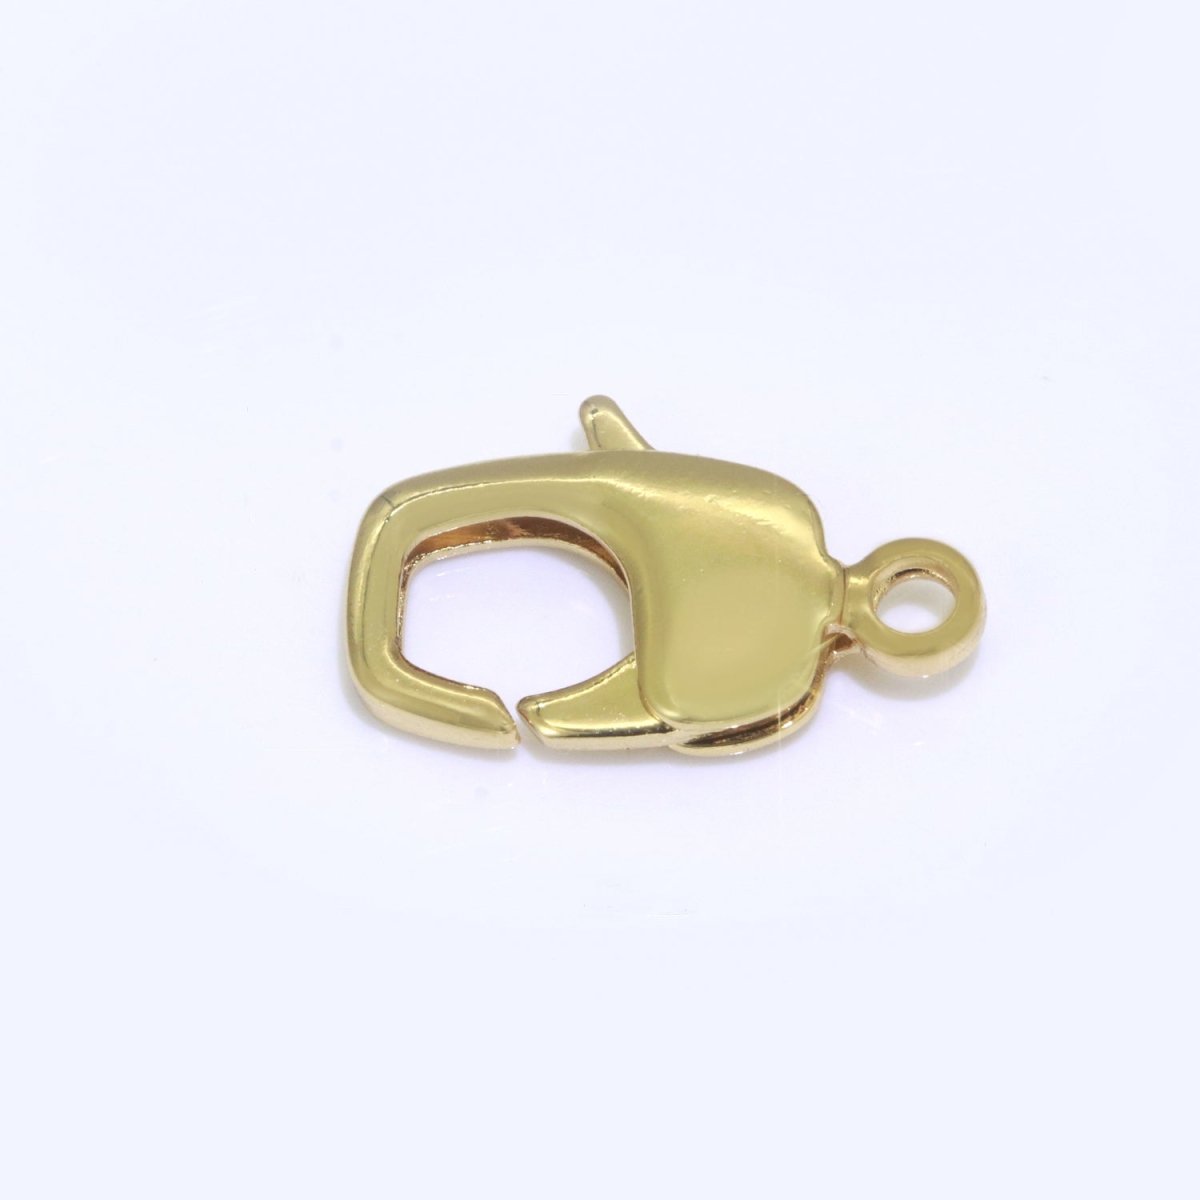 20x12mm Lobster Clasp in Gold Filled / Silver For Necklace Bracelet Anklet Jewelry Making L-502 L-503 - DLUXCA